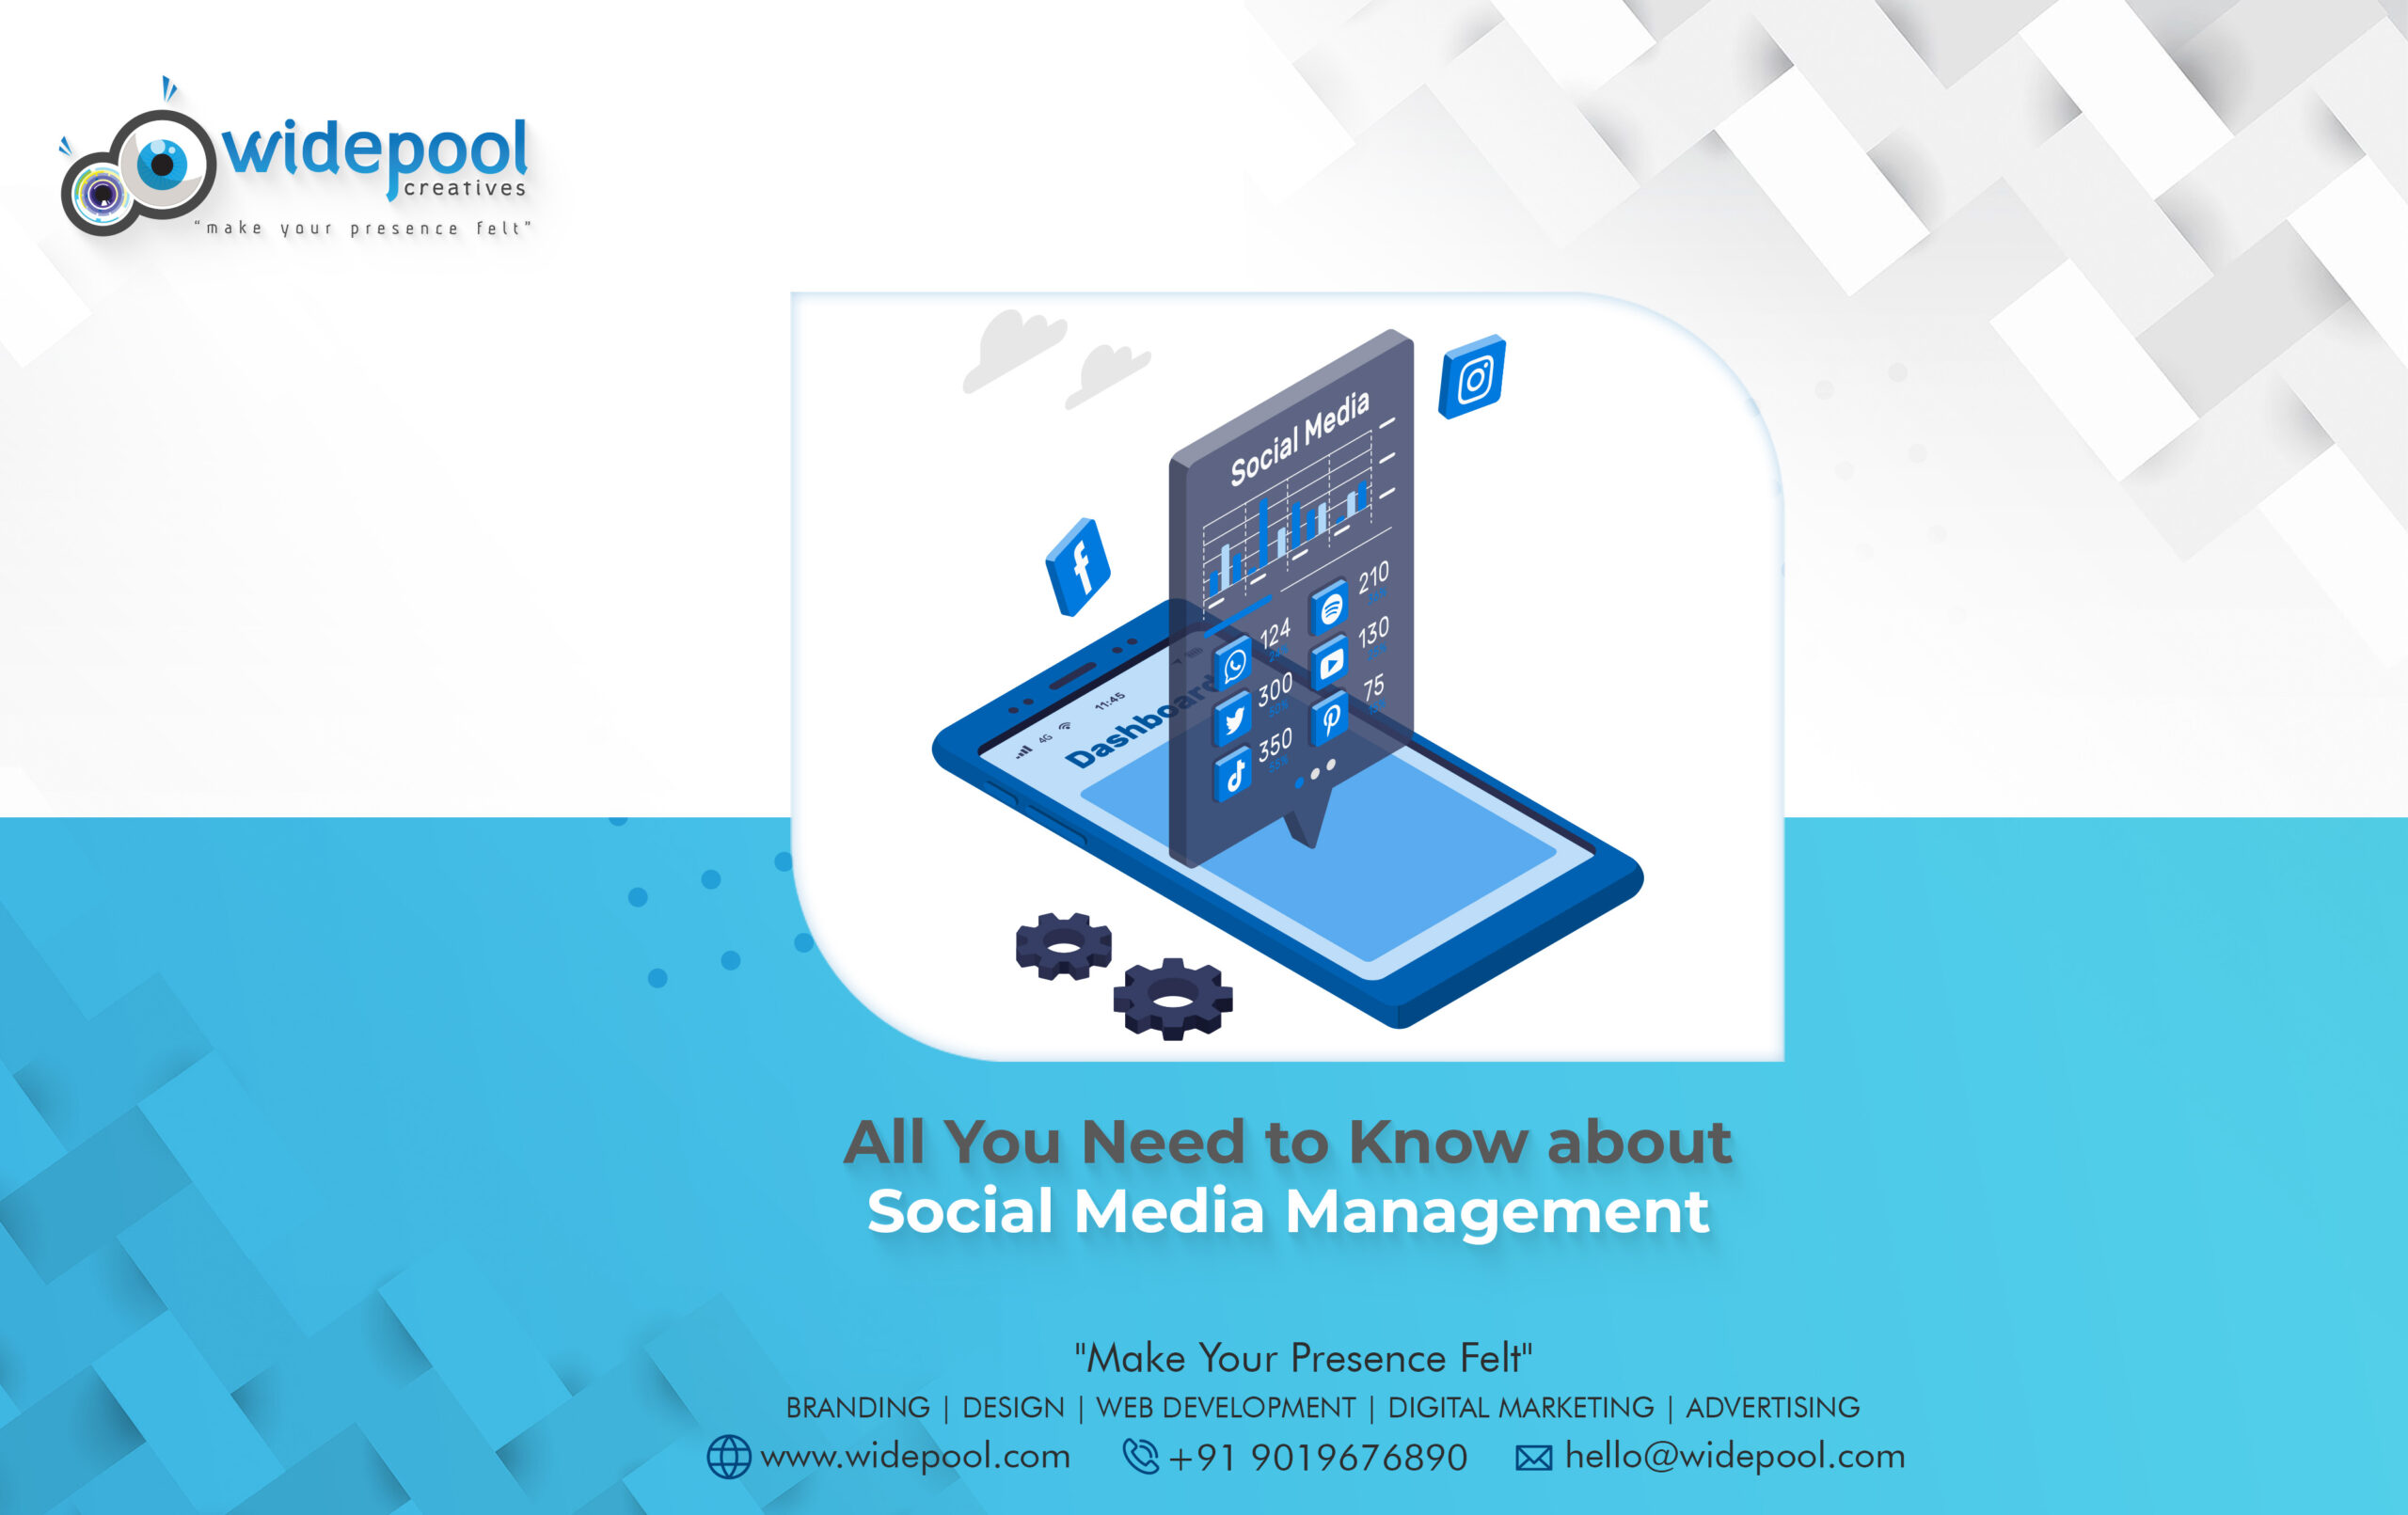 All You Need to Know about Social Media Management